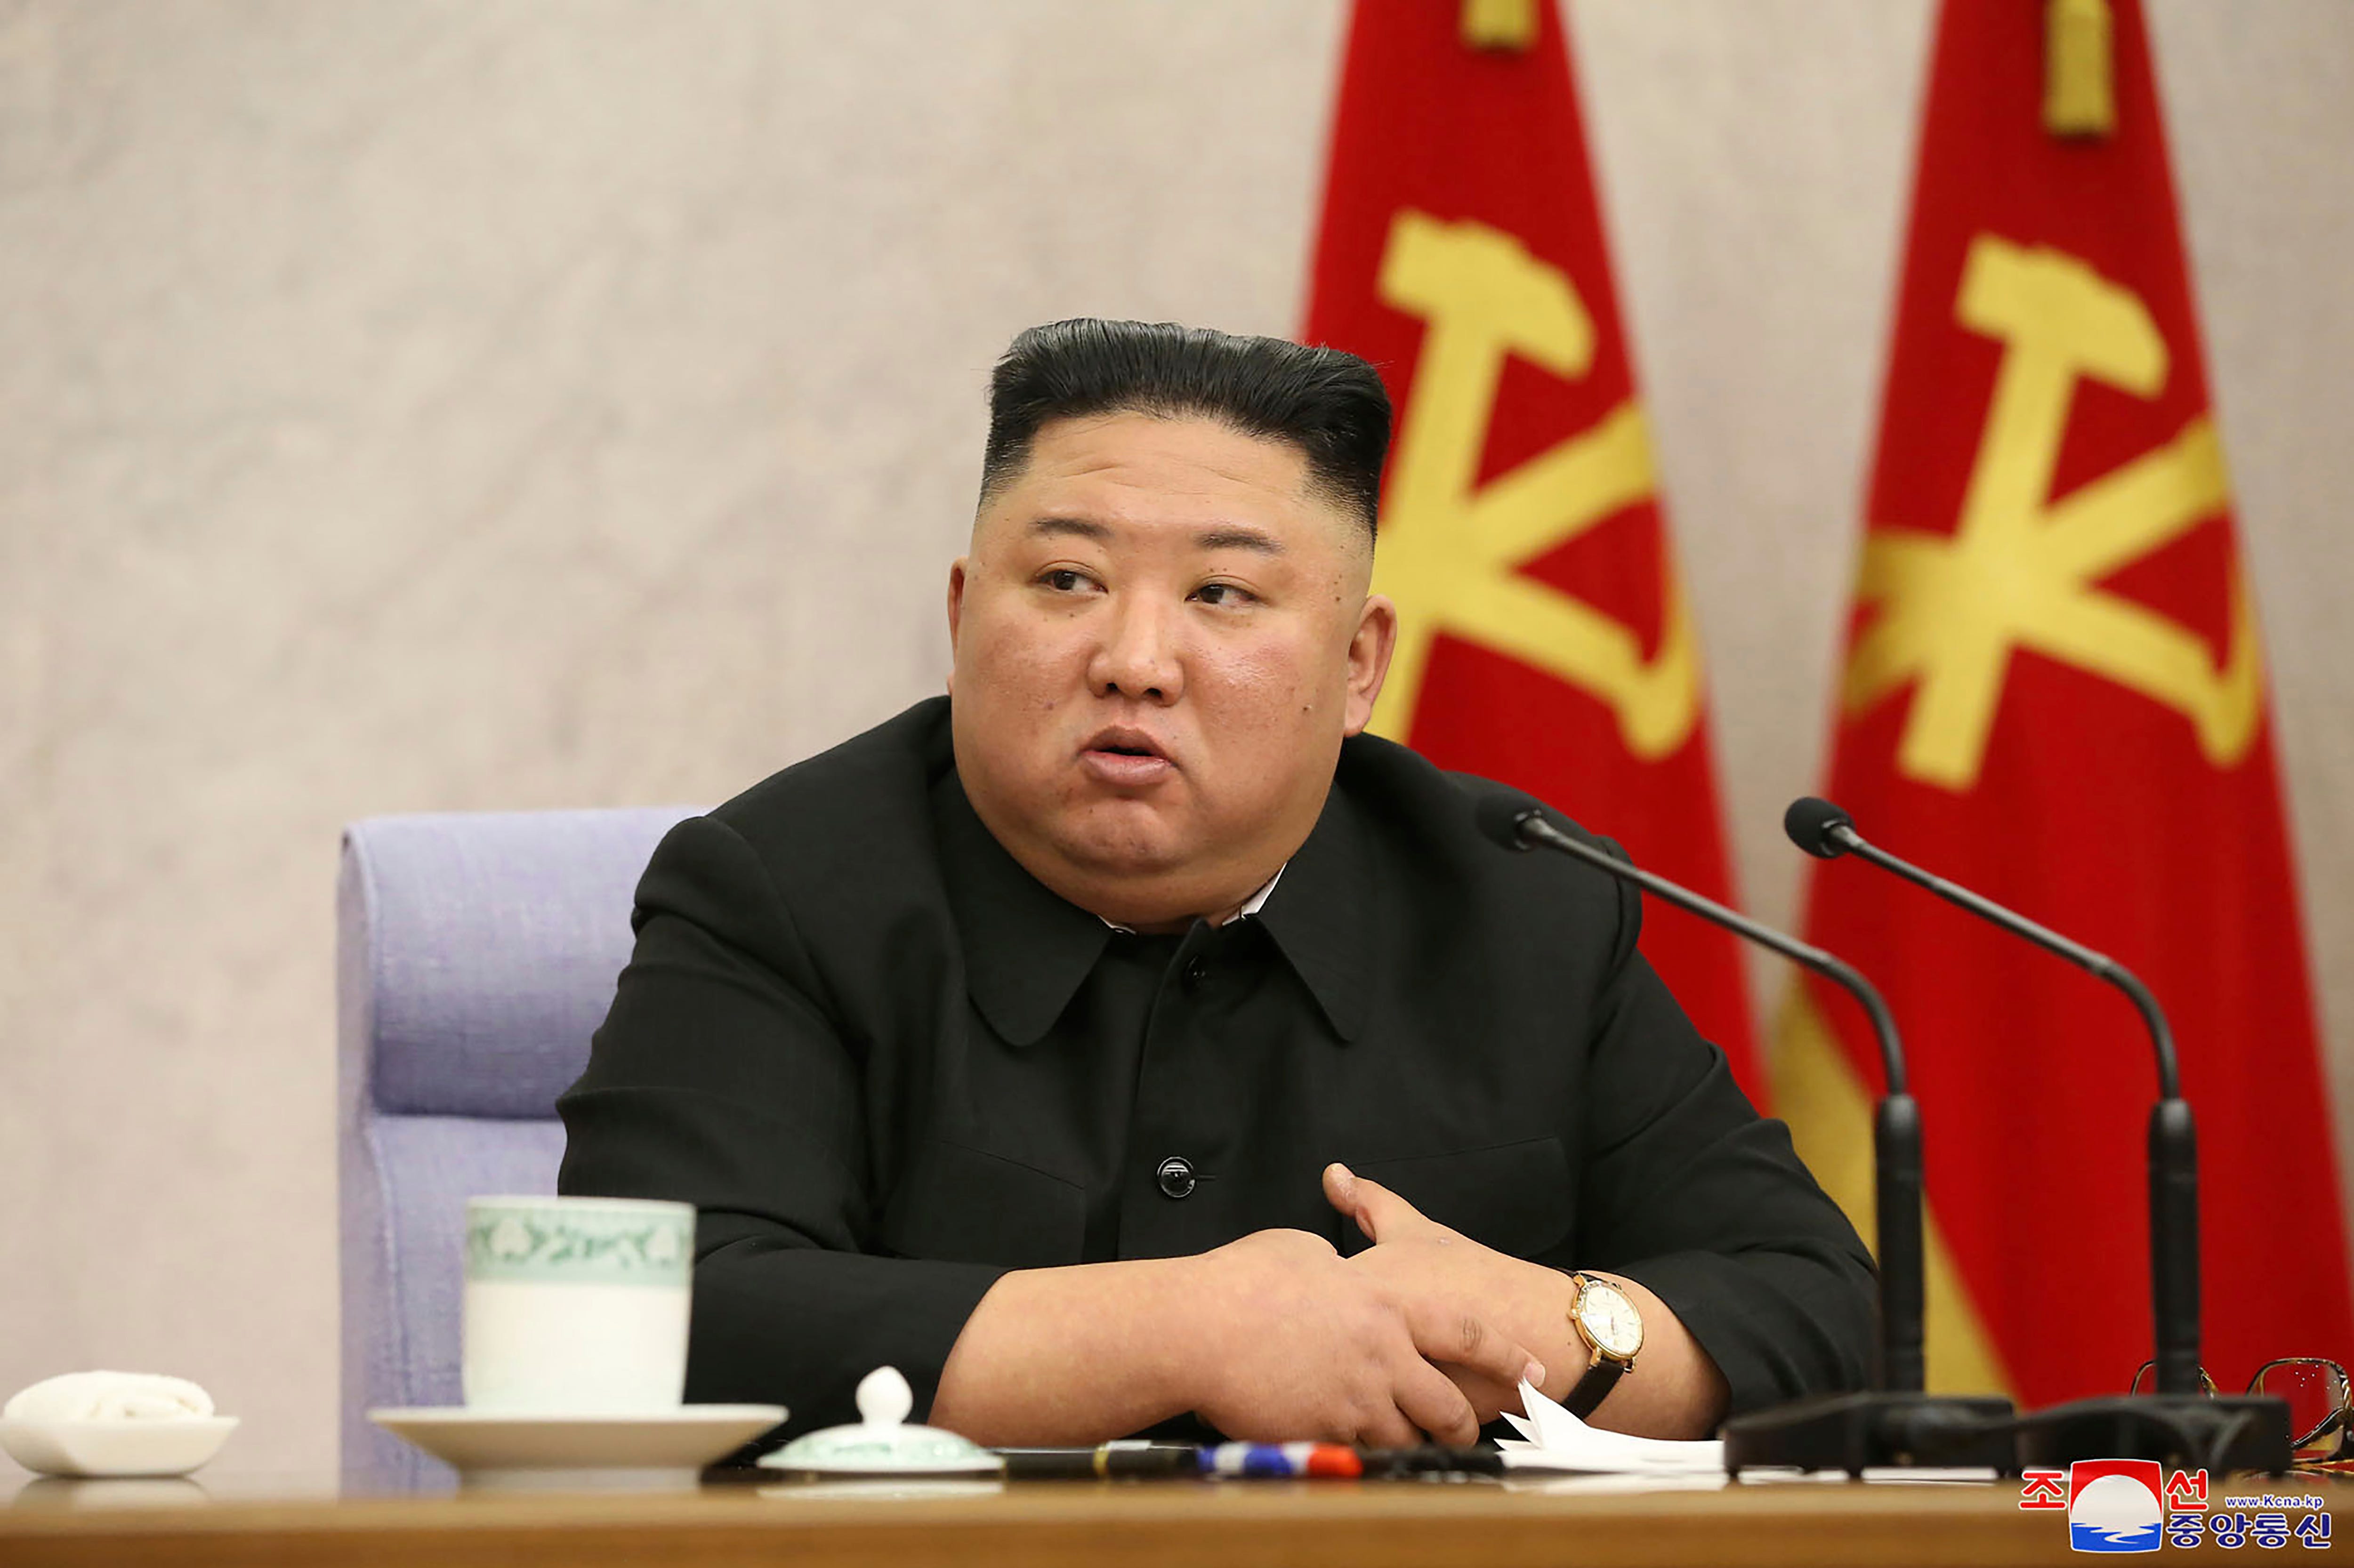 NKorean leader calls for meeting to review battered economy 1